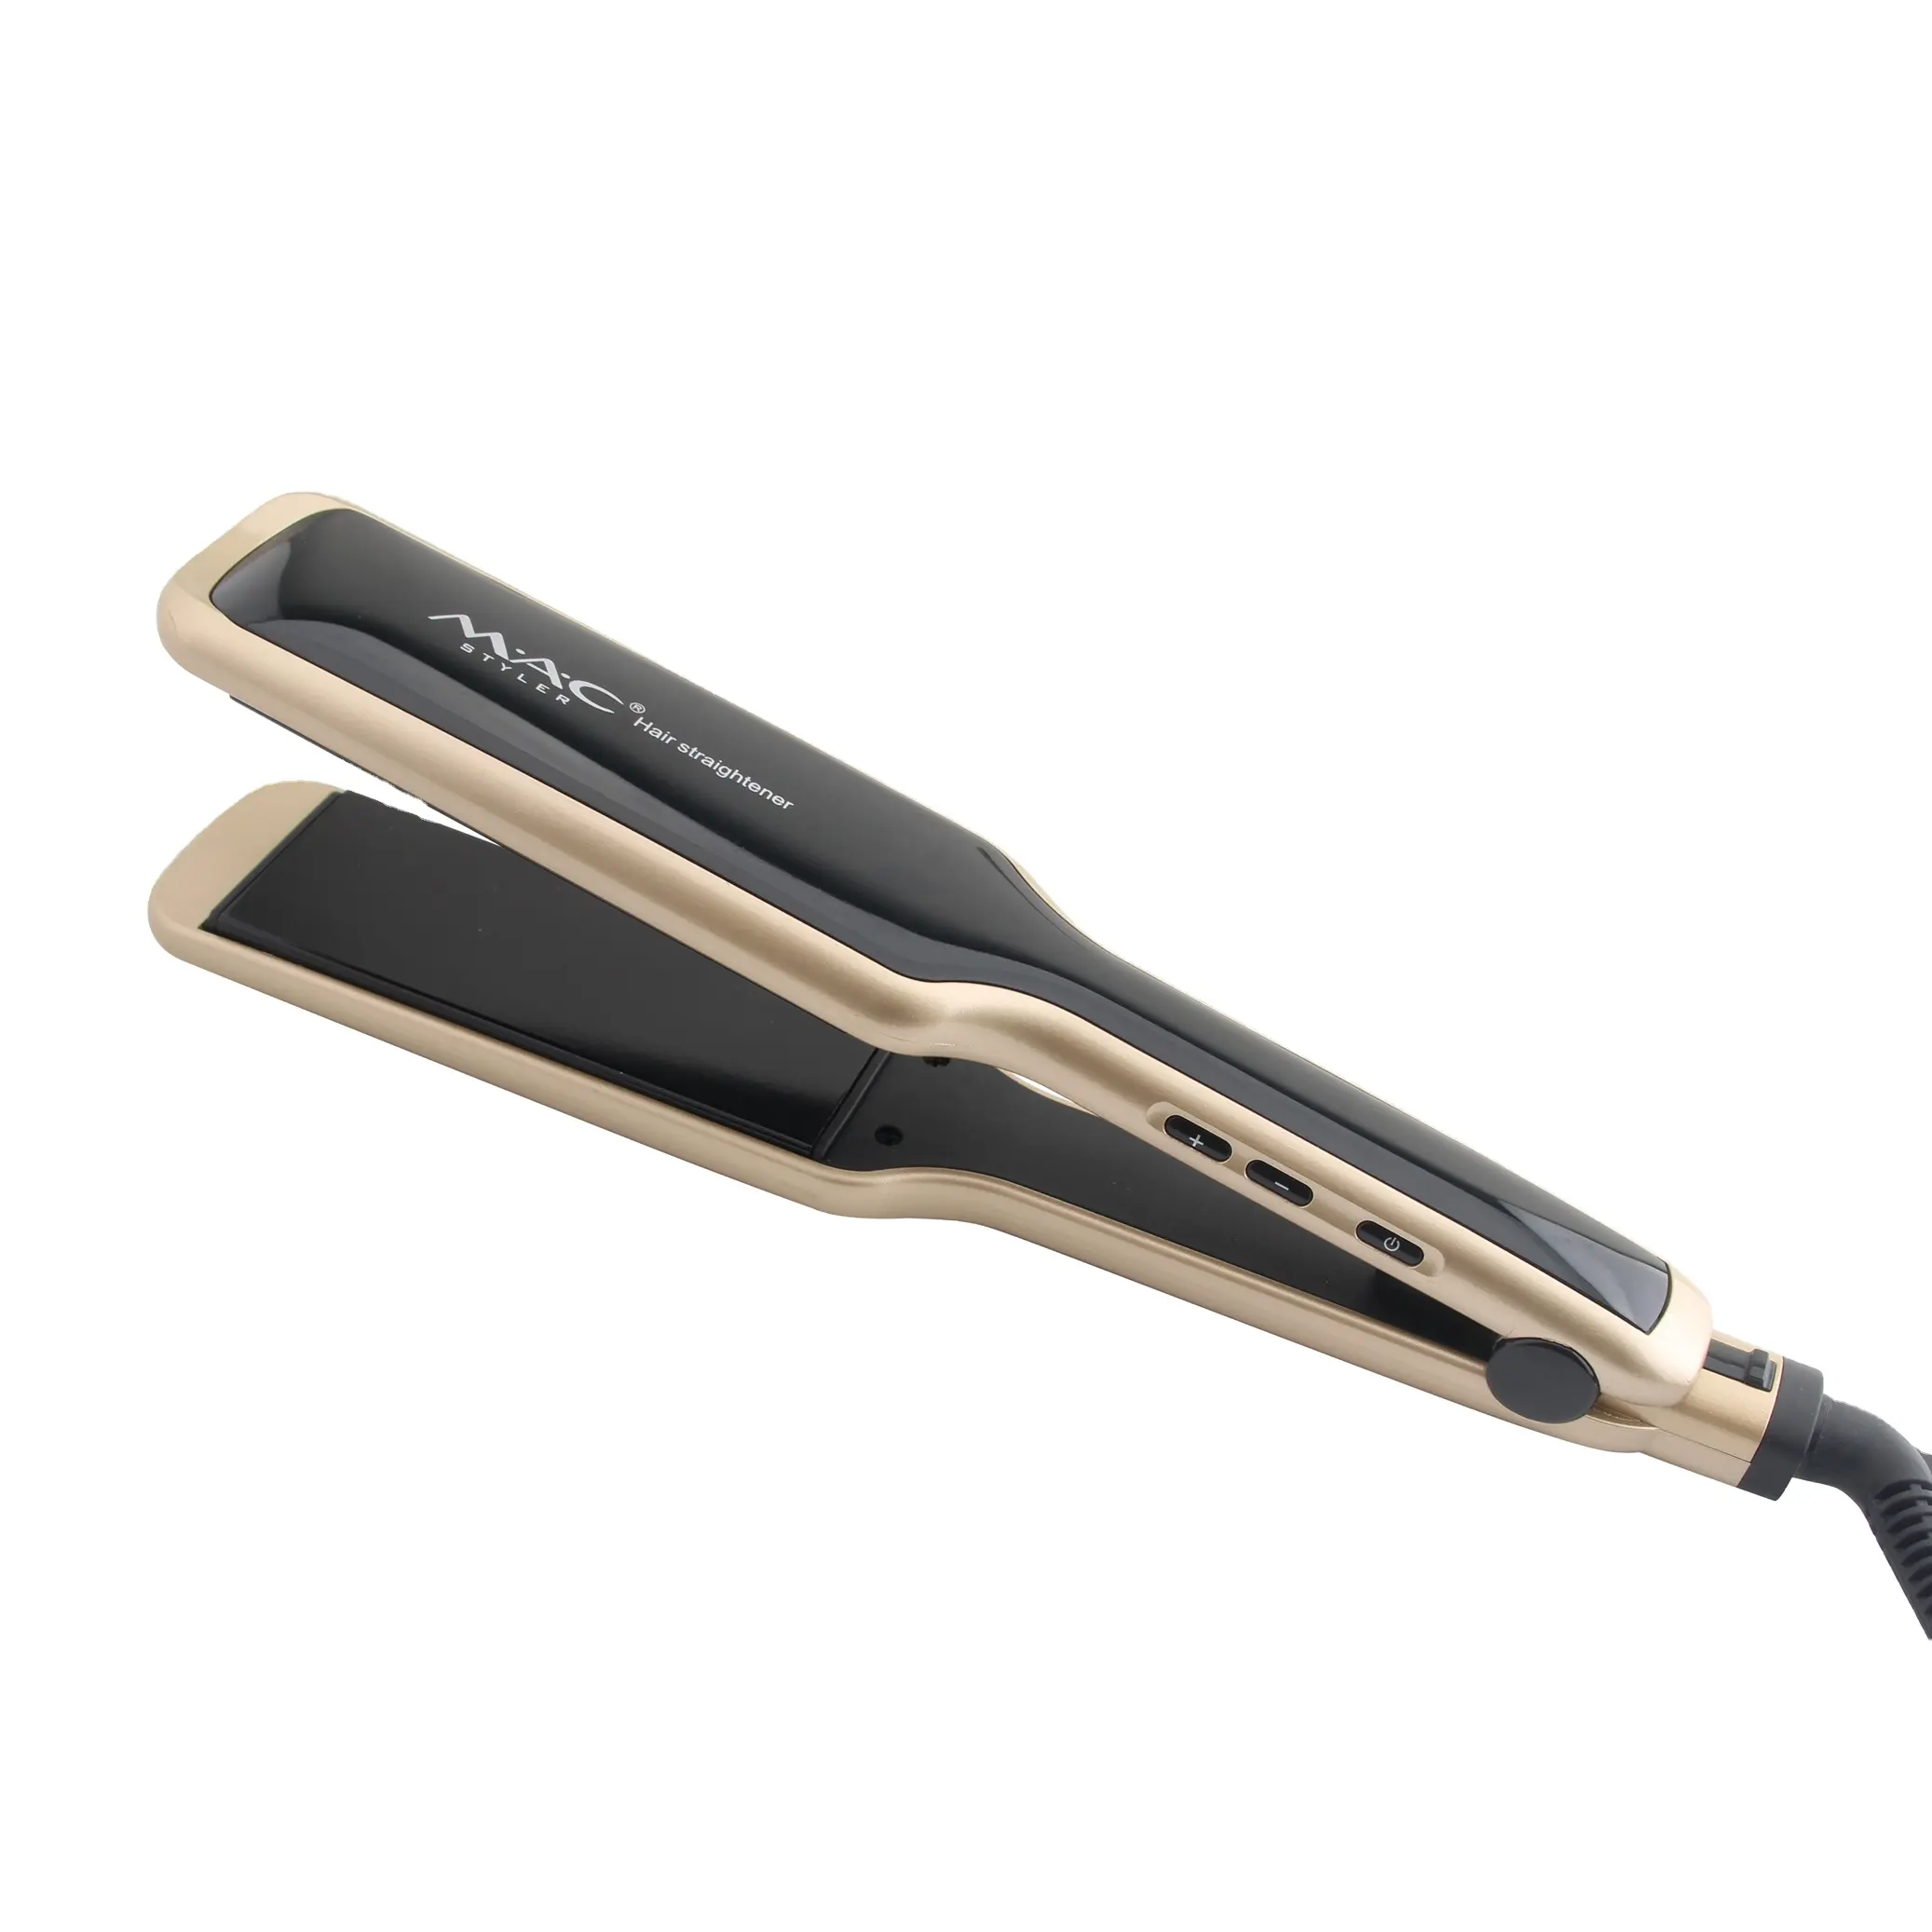 Flat Iron Hair Straightener with Wide Ceramic Plates, Anti Frizz Straightening Iron for All Hair Types